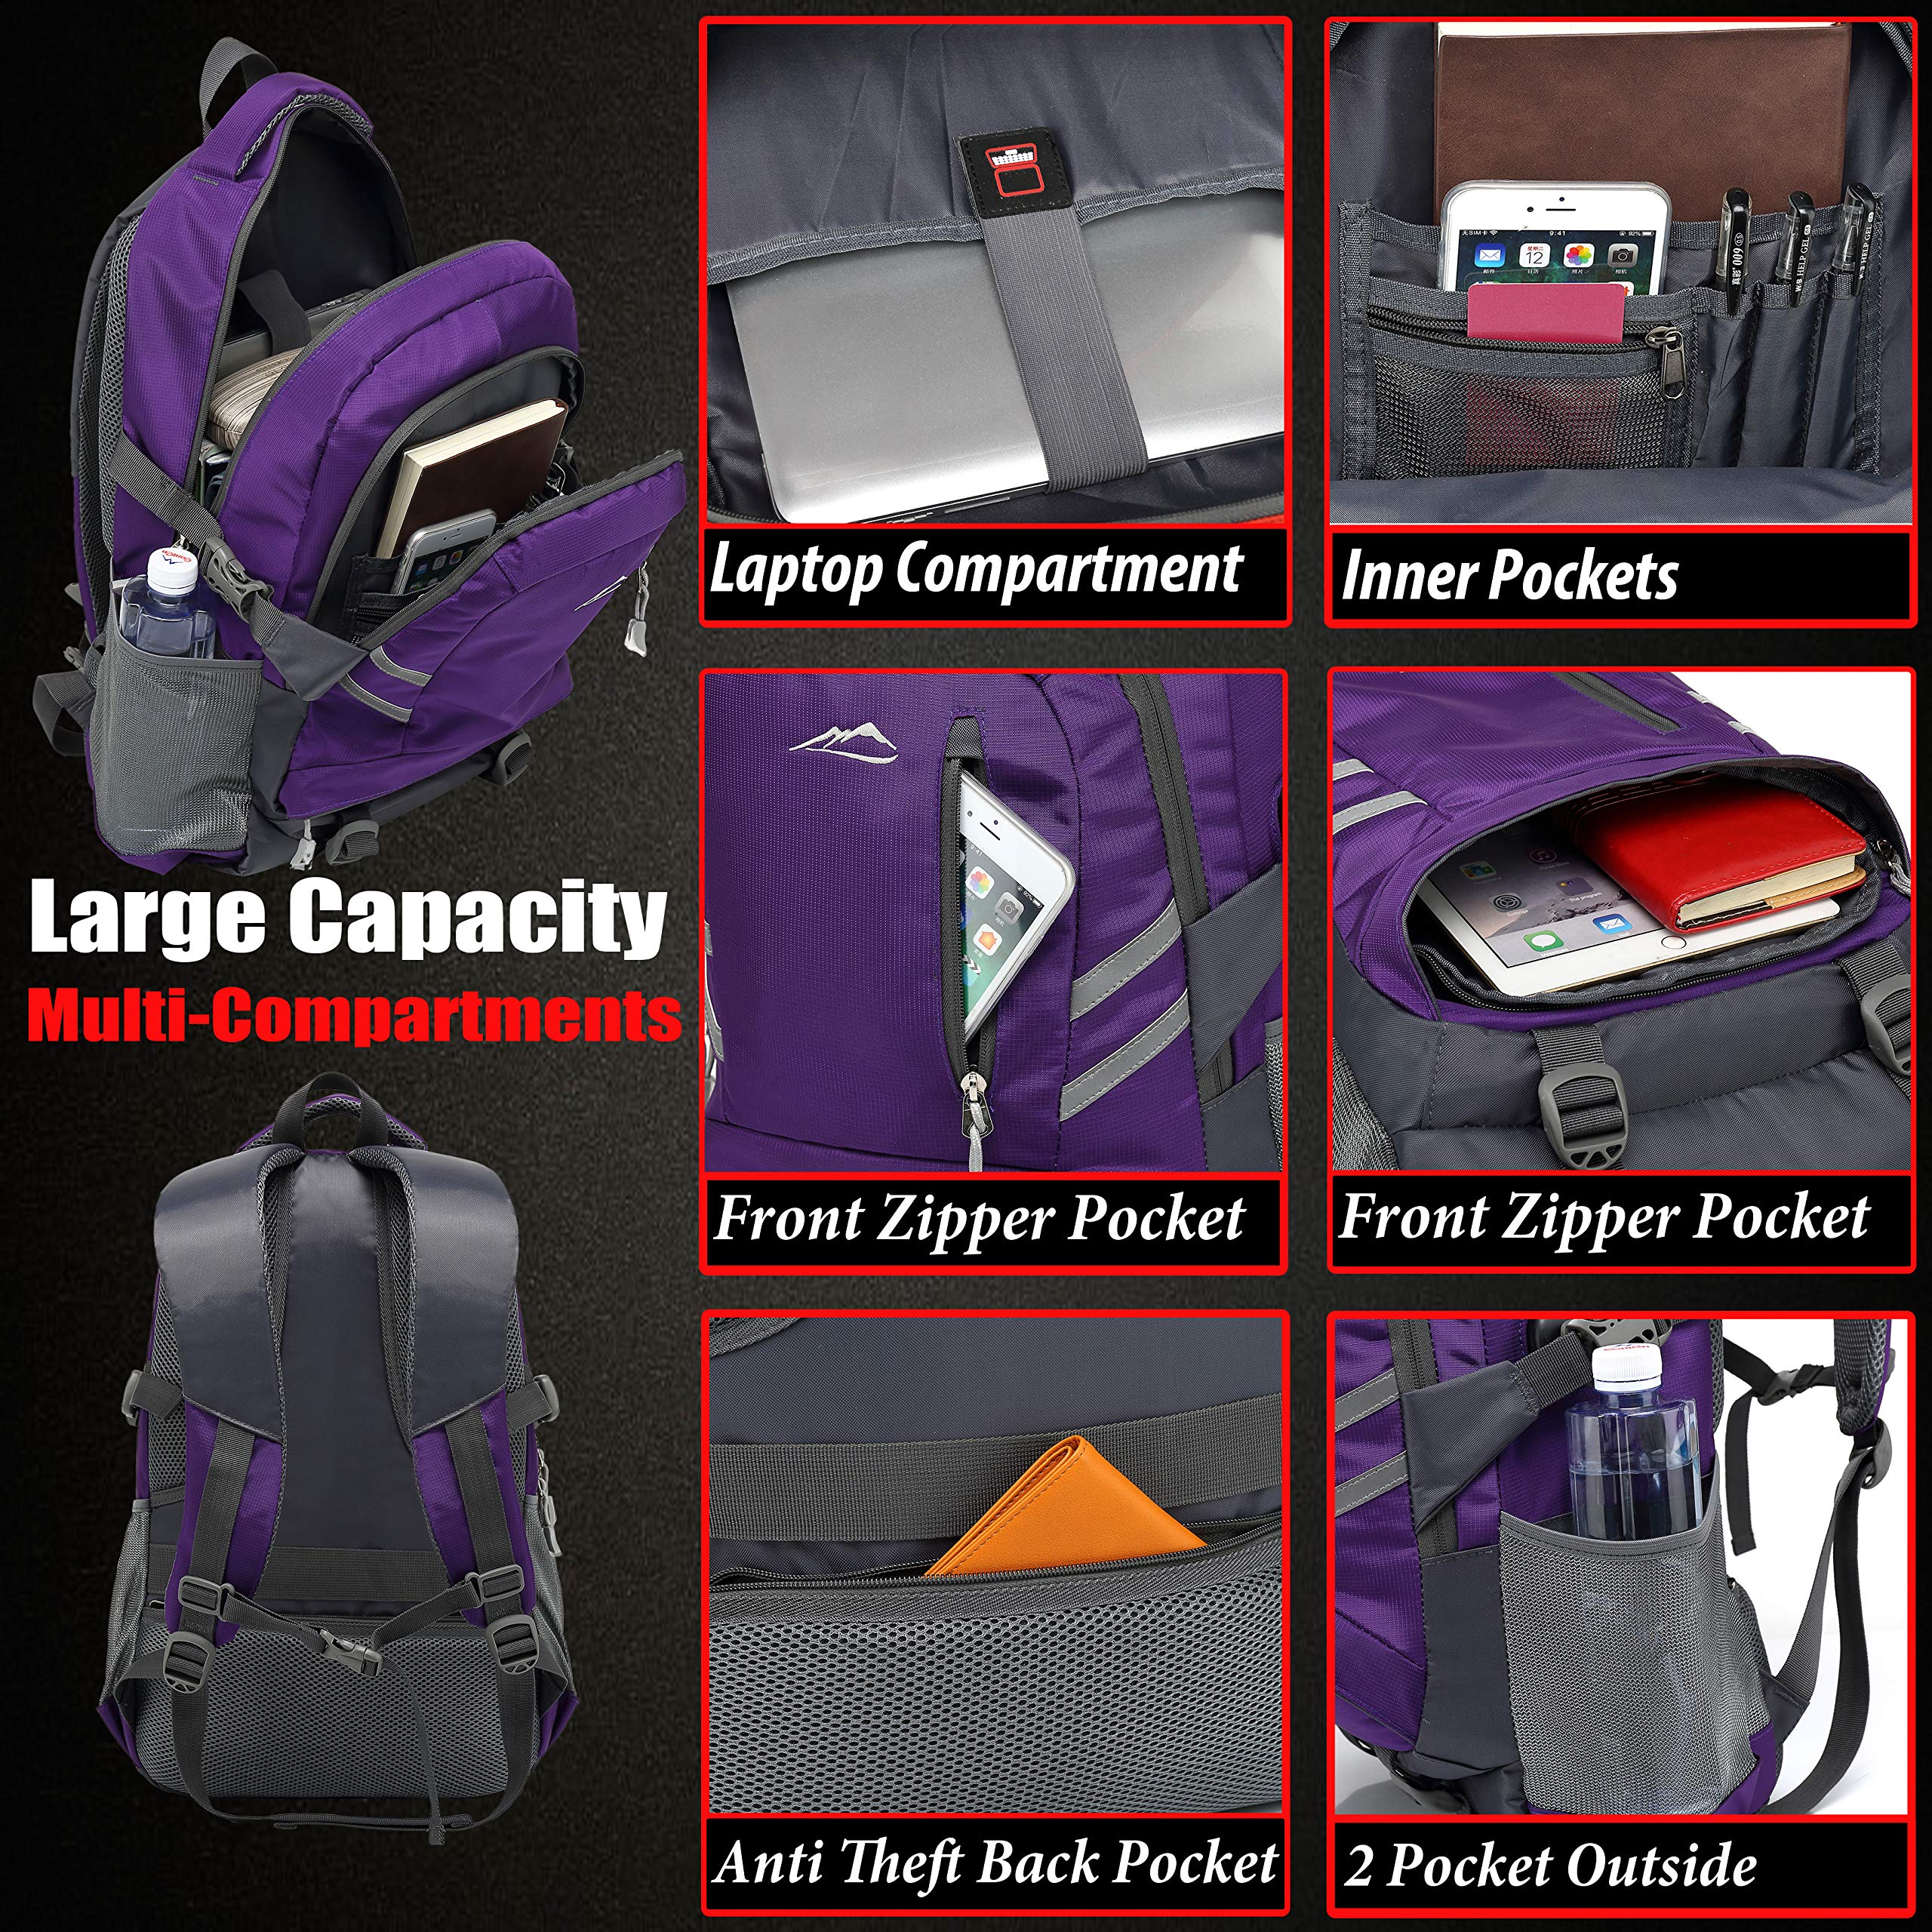 Backpack Bookbag for College Laptop Travel,Fit Laptop Up to 15.6 inch Multi Compartment with USB Charging Port Anti theft, Gift for Men Women (Purple)